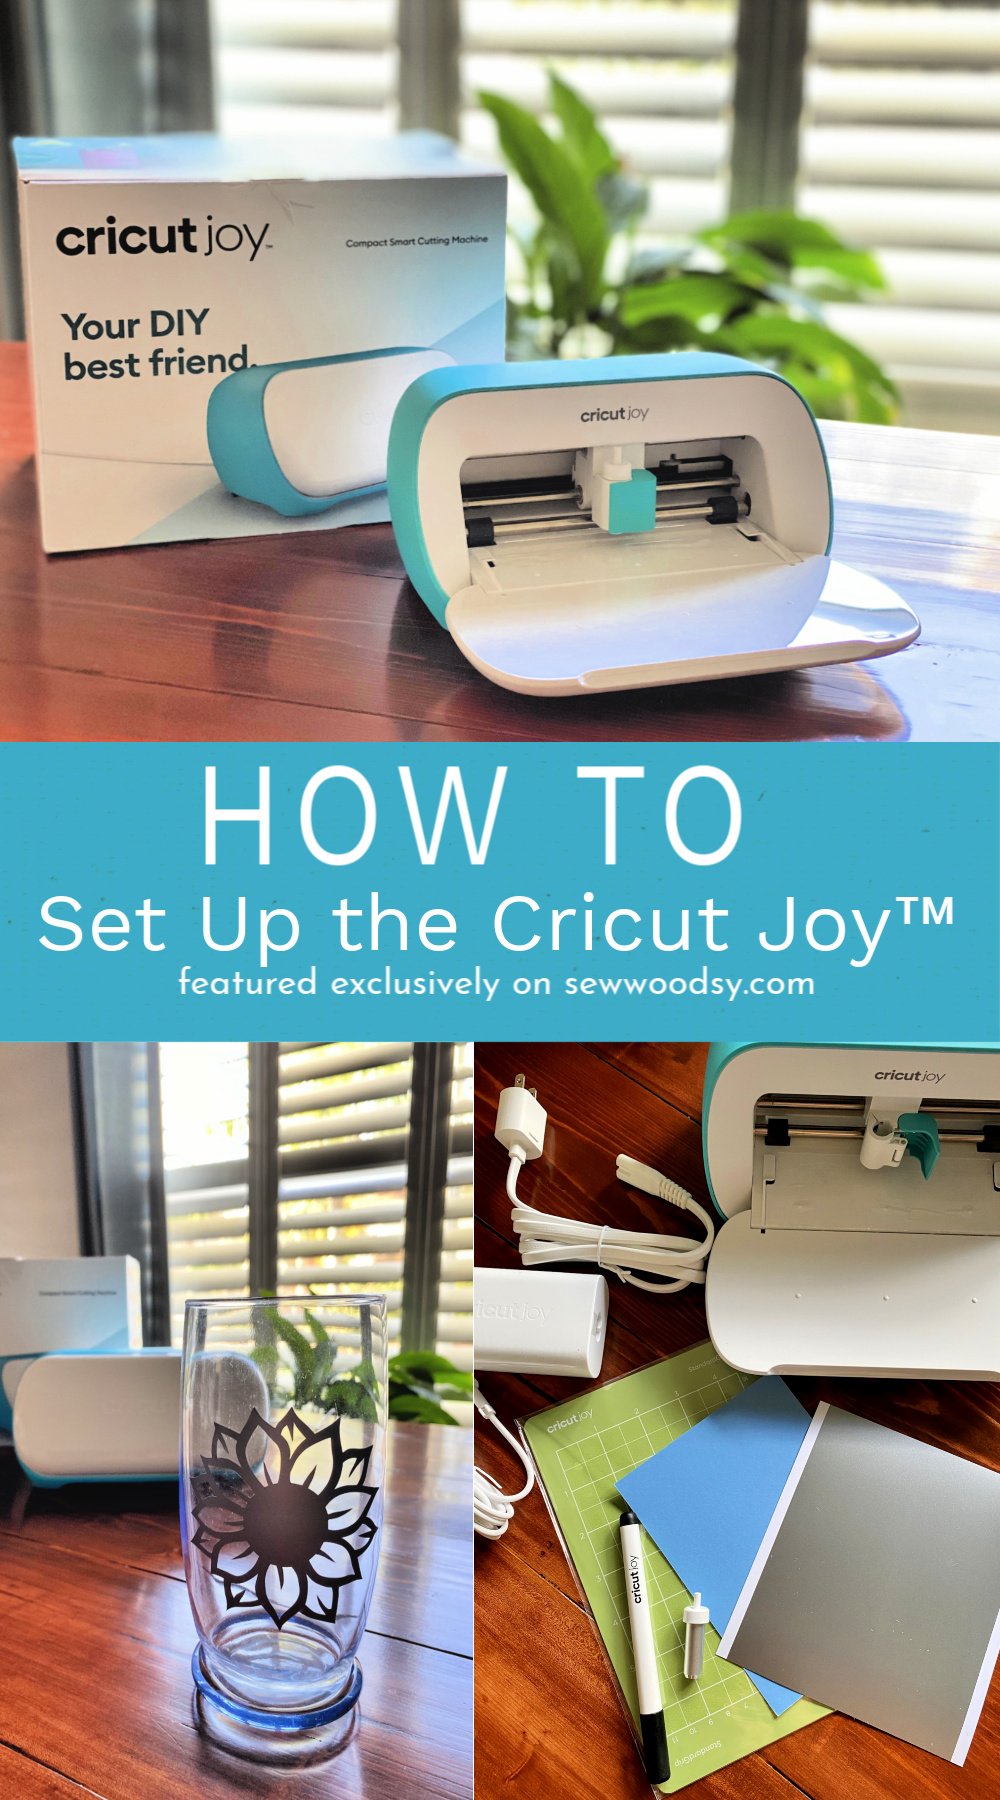 How To Set Up The Cricut Joy collage